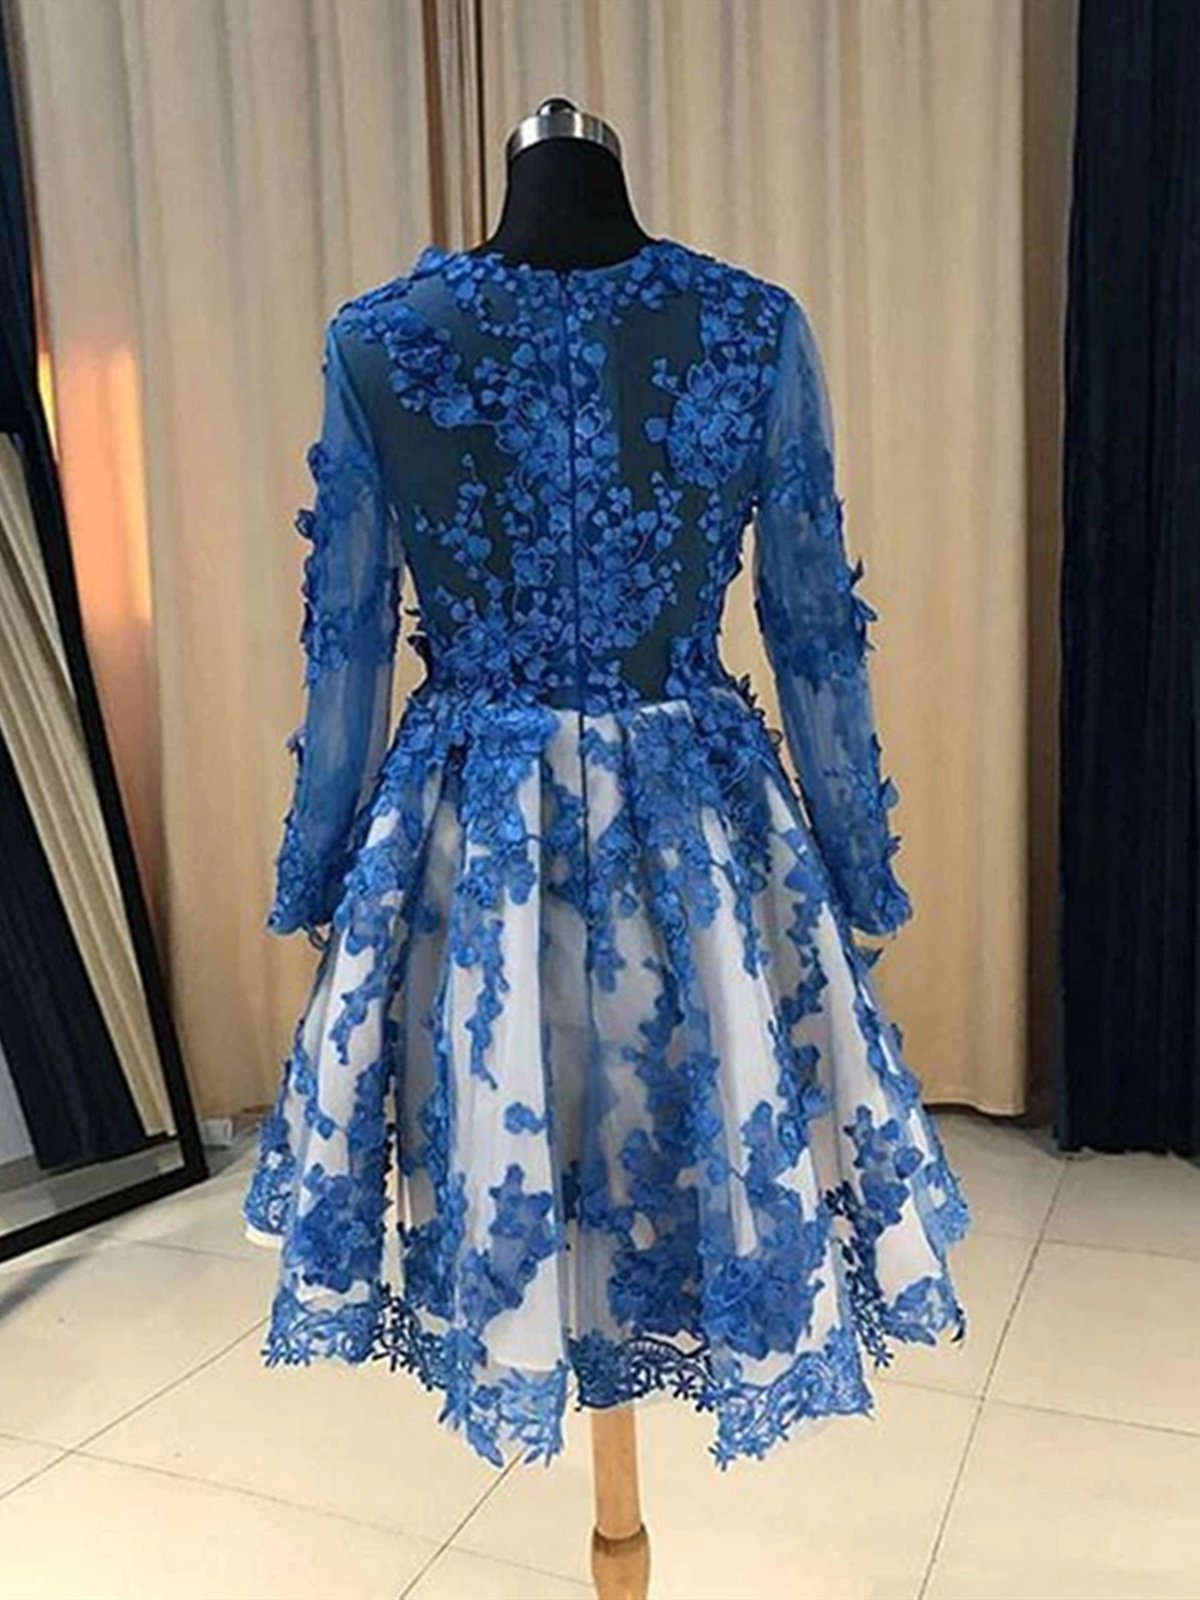 Prom Dress Type, Long Sleeves Short Blue Lace Prom Dresses, Short Blue Lace Formal Homecoming Graduation Dresses